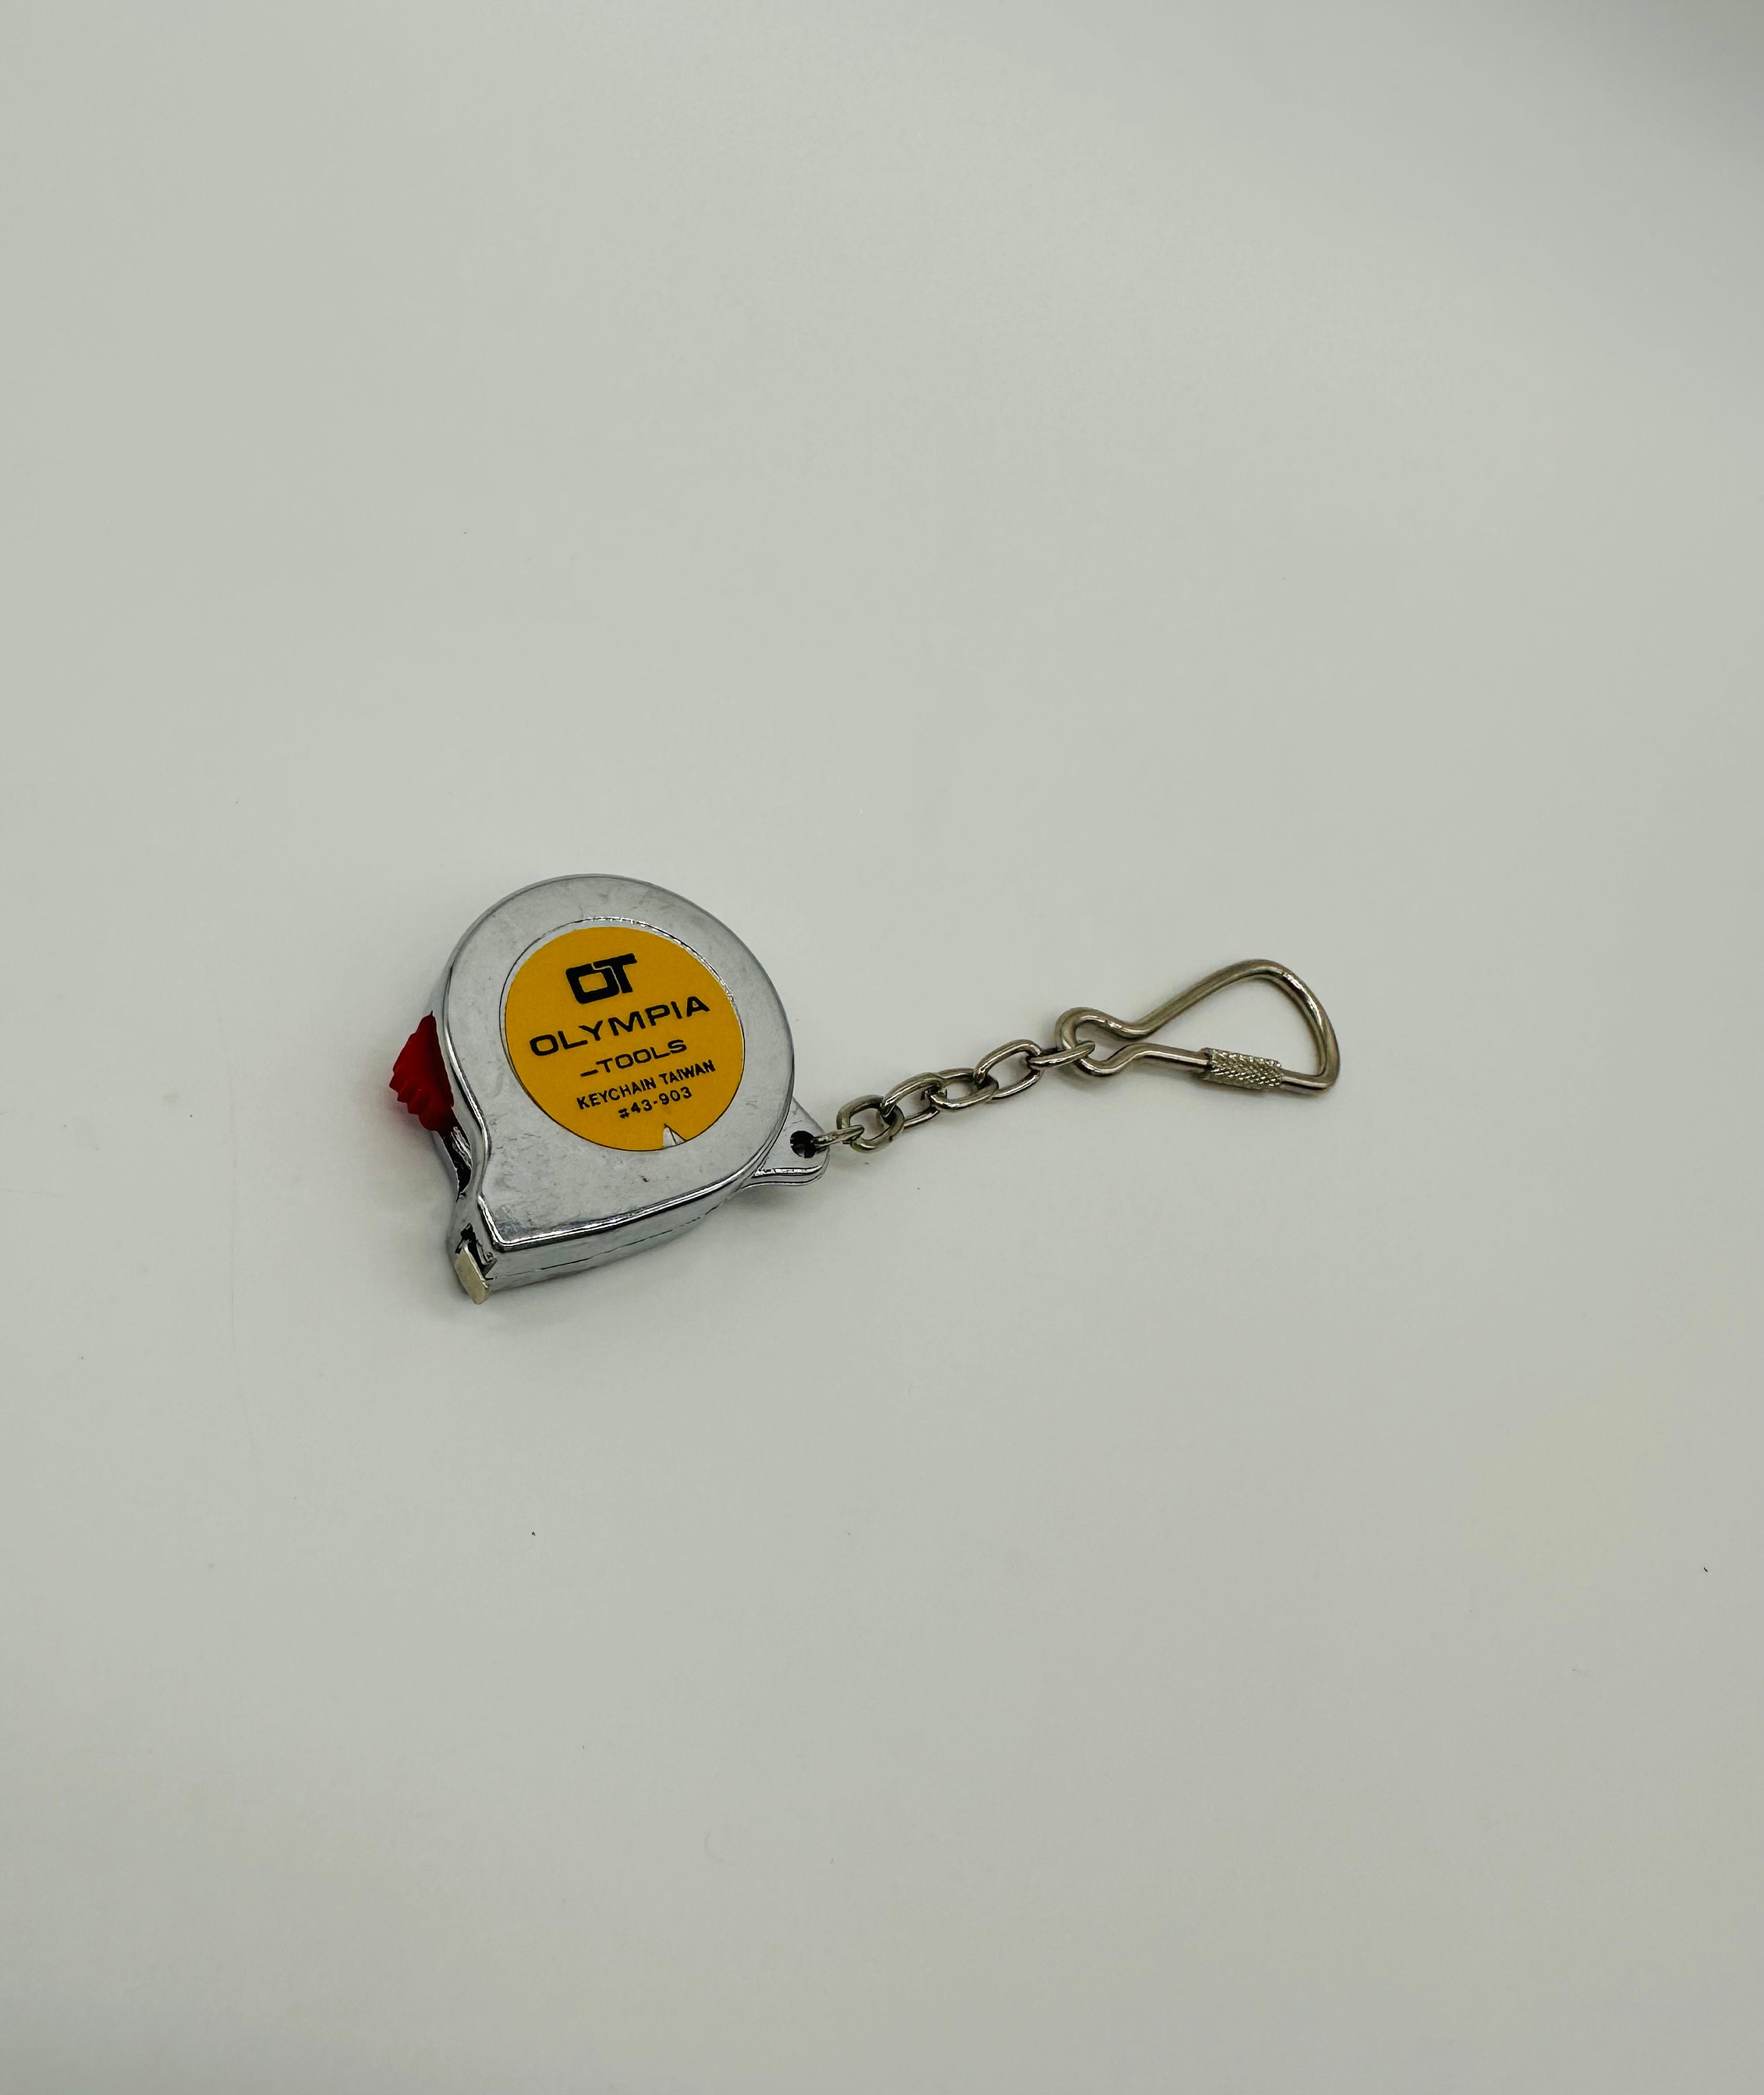 Mini Metal Measuring Tape 30 Keychain Measuring Tape for Sewing/knitting/crochet/embroidery  Free Shipping 